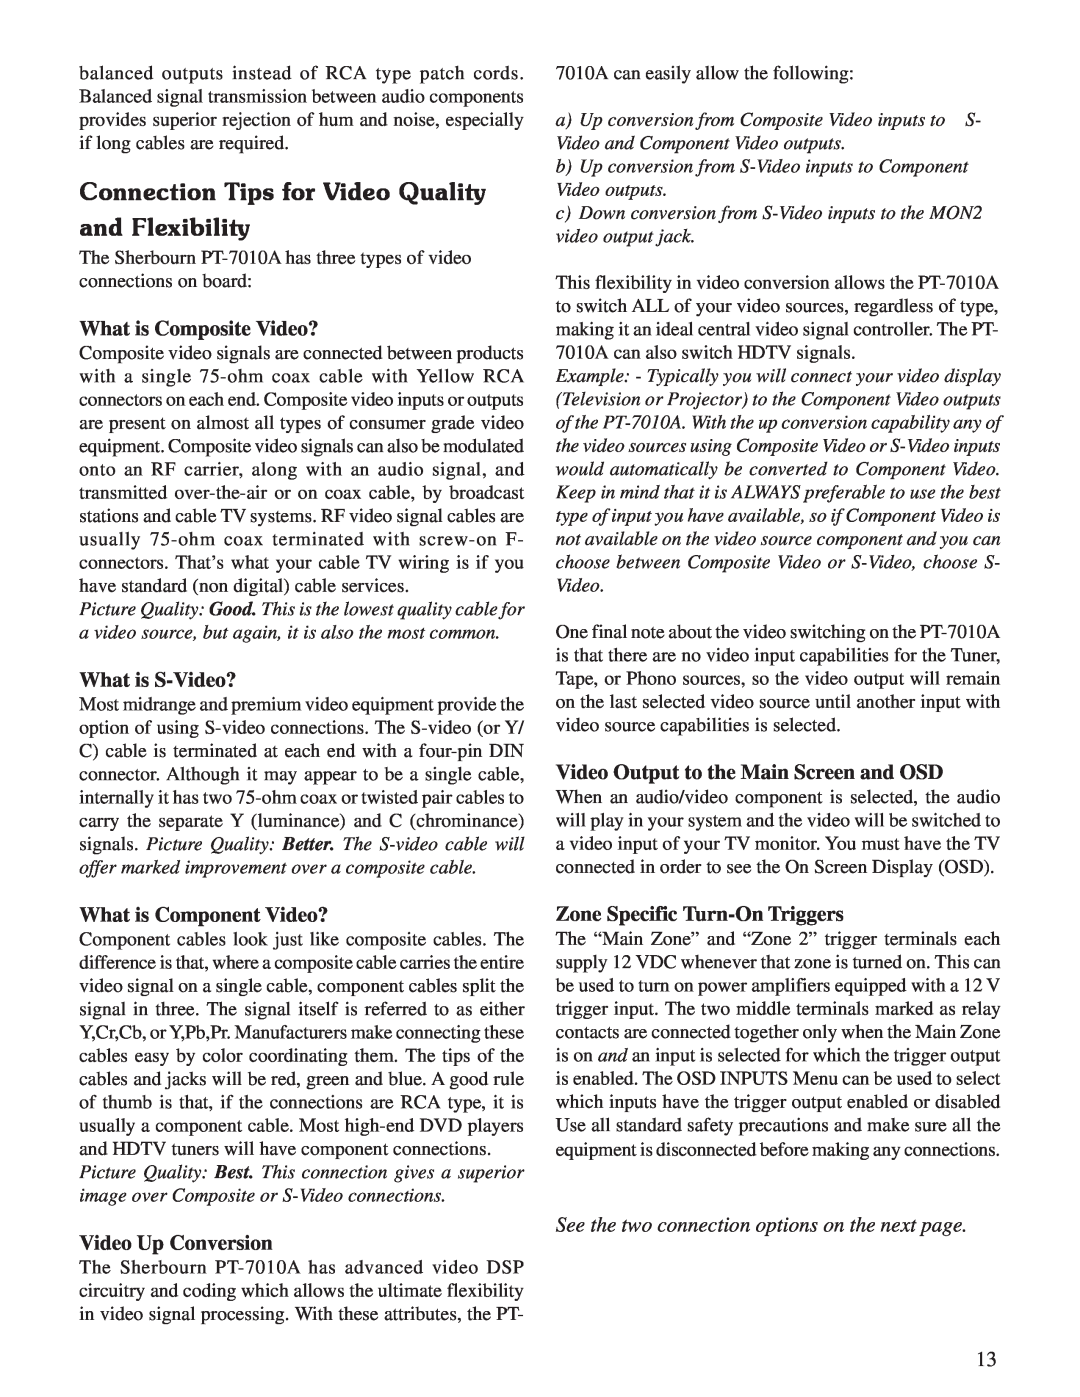 Sherbourn Technologies PT-7010A owner manual Connection Tips for Video Quality and Flexibility, What is Composite Video? 